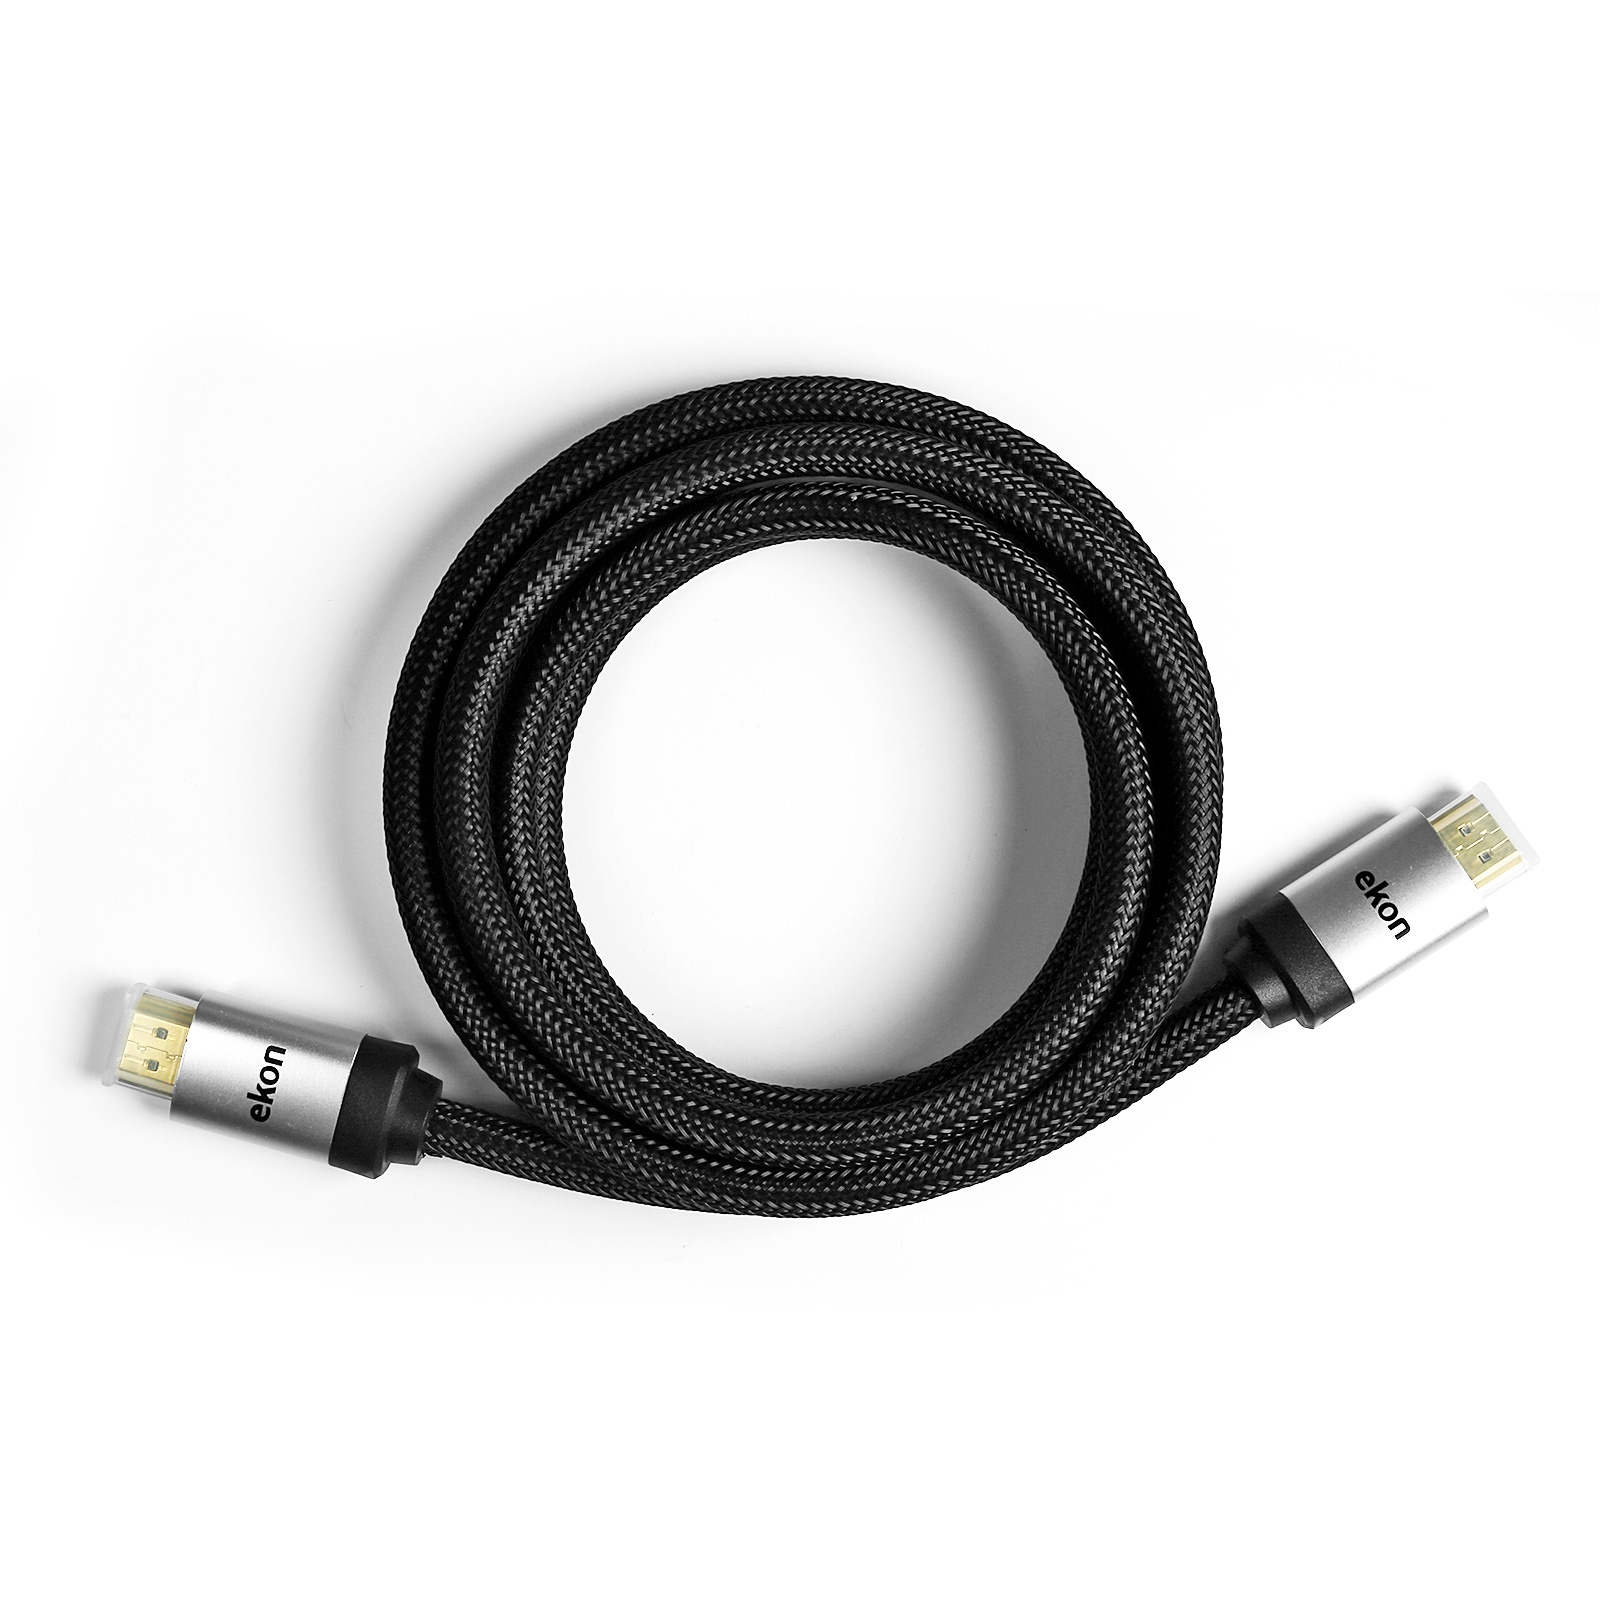 EKON HDMI V 1.4 cable male to male high speed with ethernet. OD 6.0mm.  Conductor pure copper,30 AWG, jacket black color. Connector PVC black  color and gold plated. Shielding: Al-foil with al-mg braid. + ferrite core. Total Lenght 1,8  mt